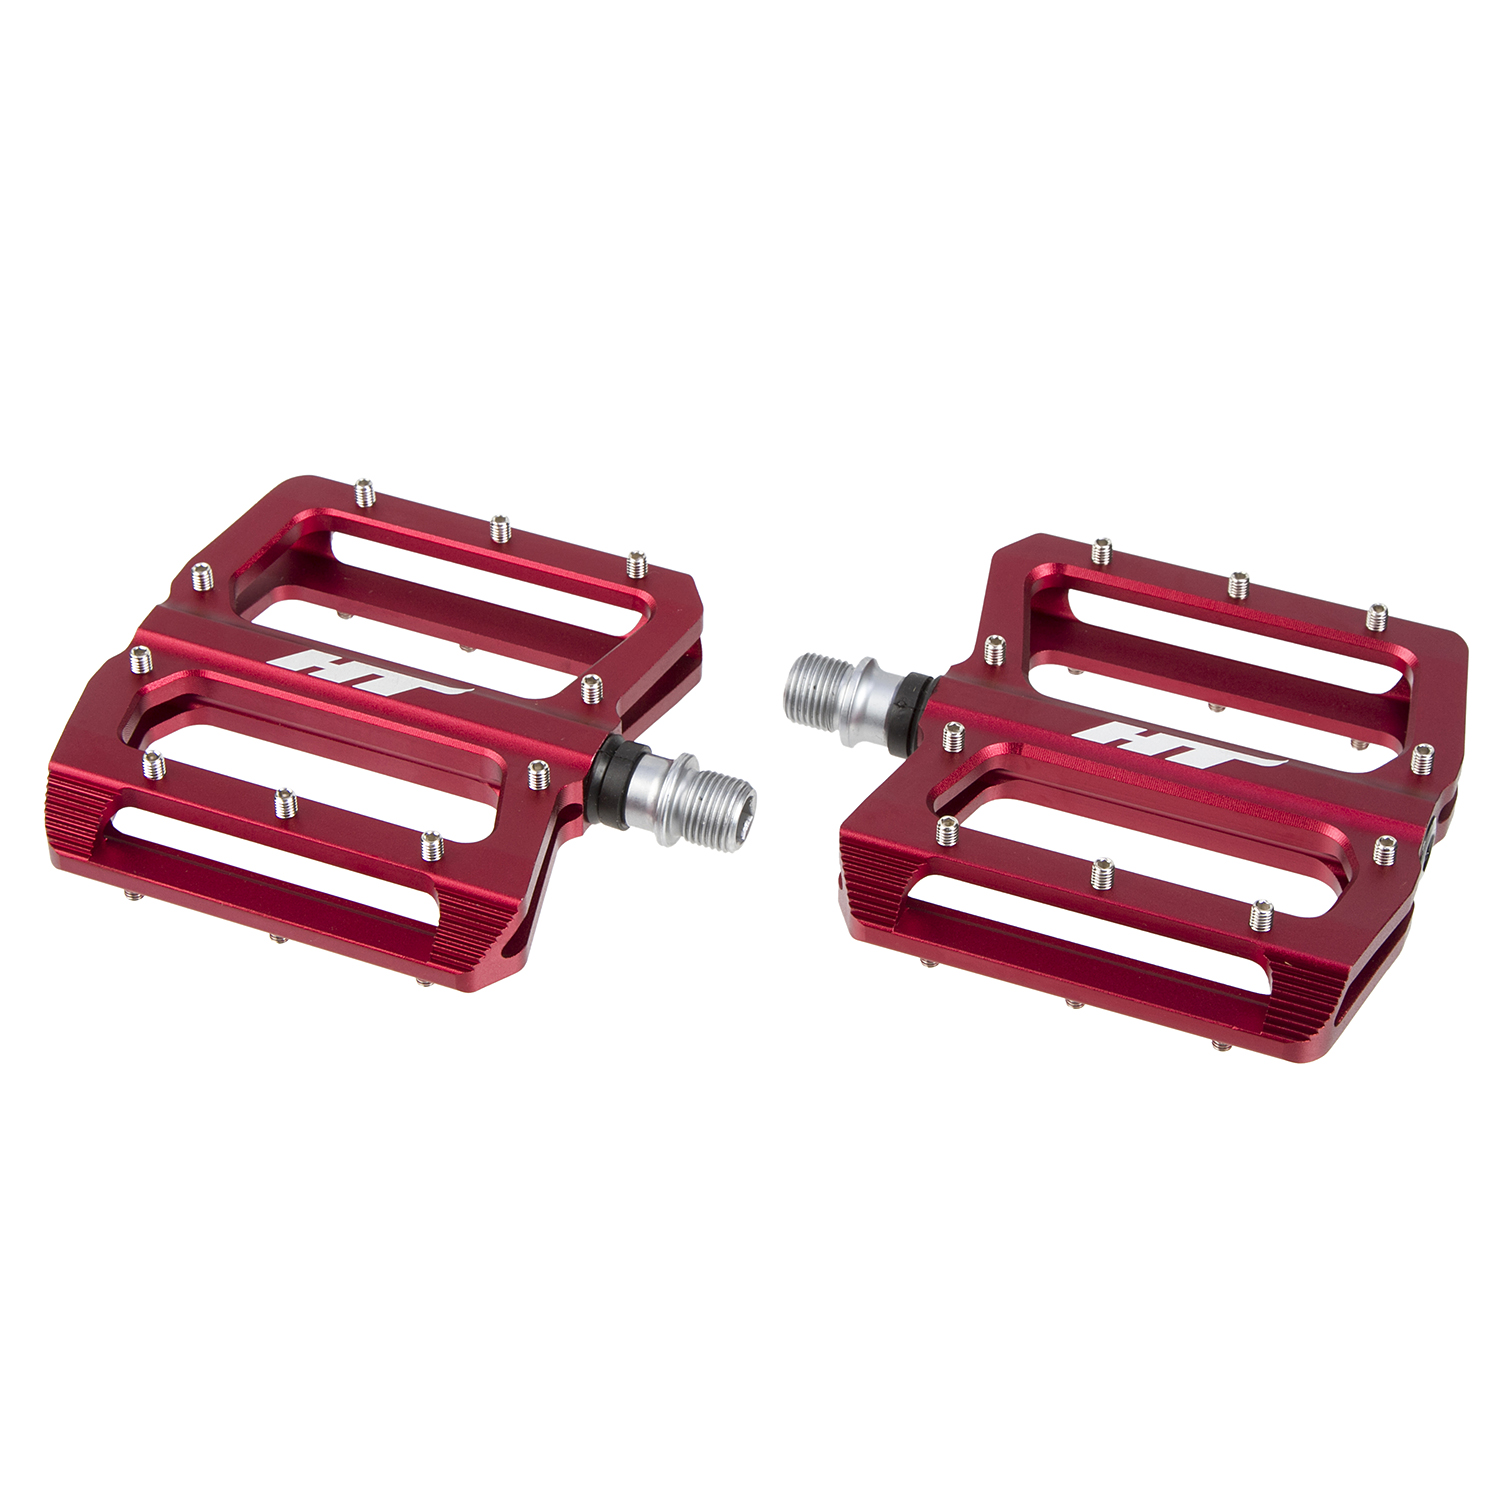 HT Components Pedals AN01 Red